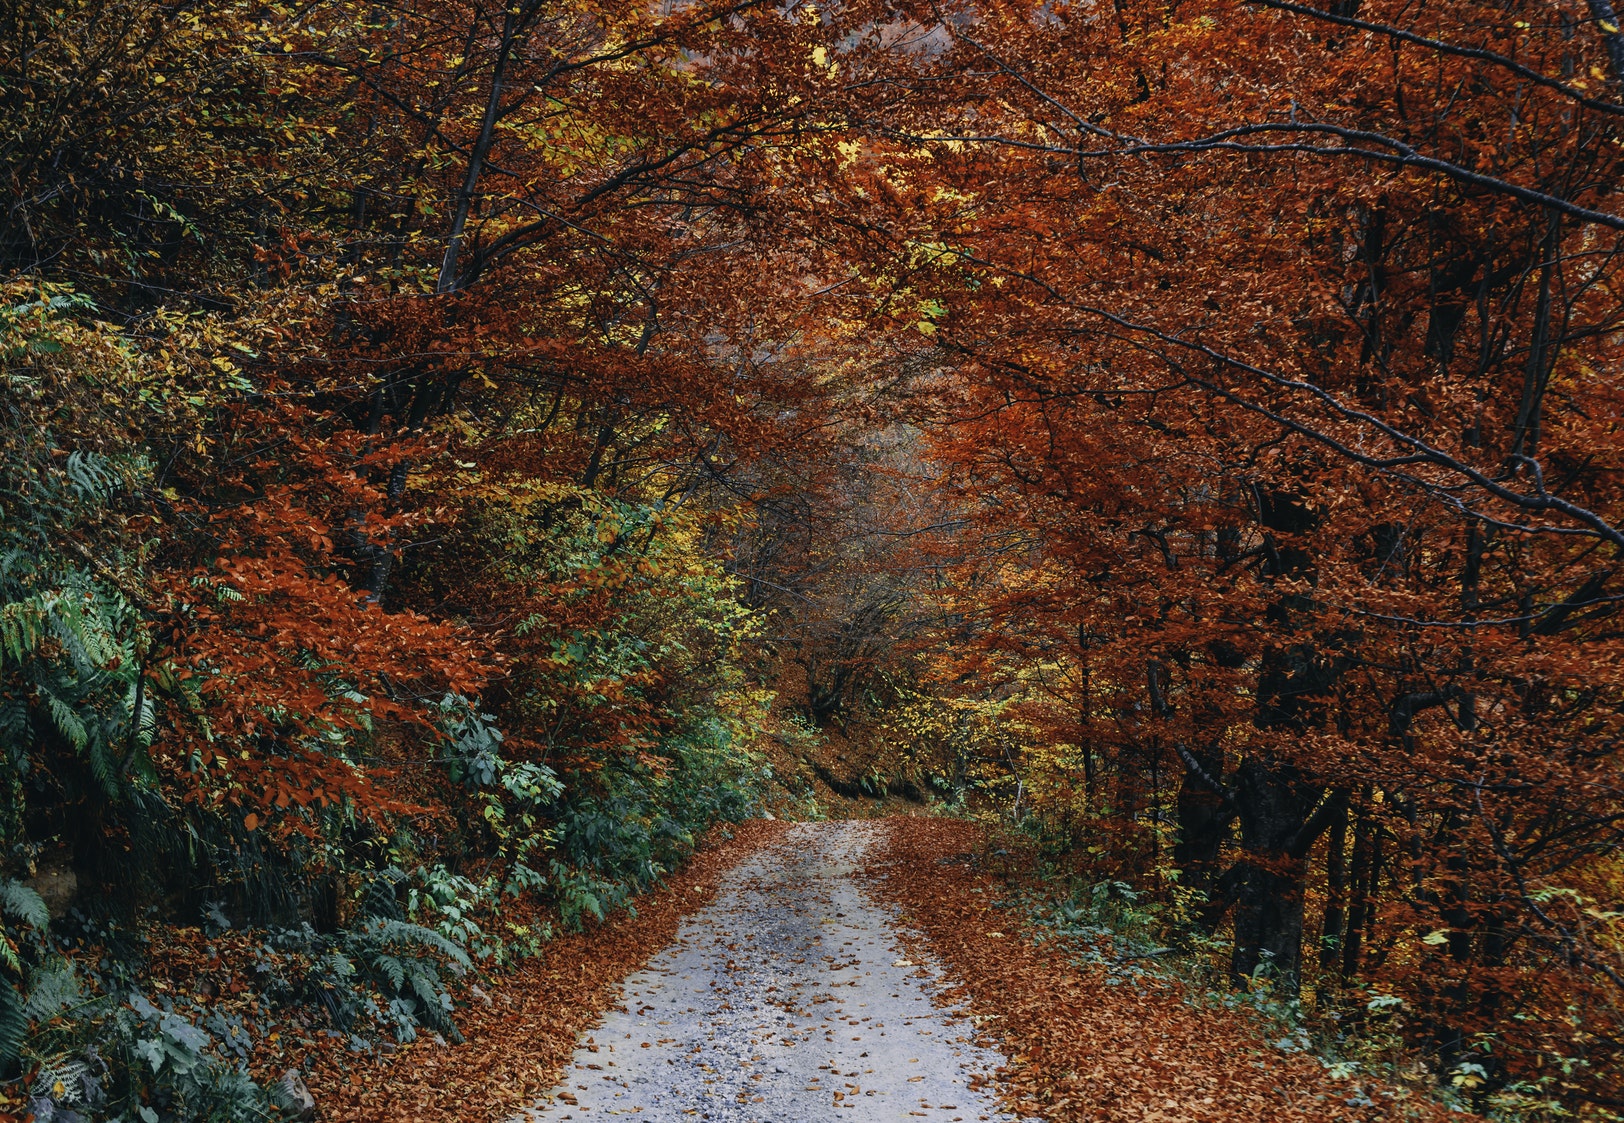 Enjoy the colors of autumn with these 7 beautiful bike rides